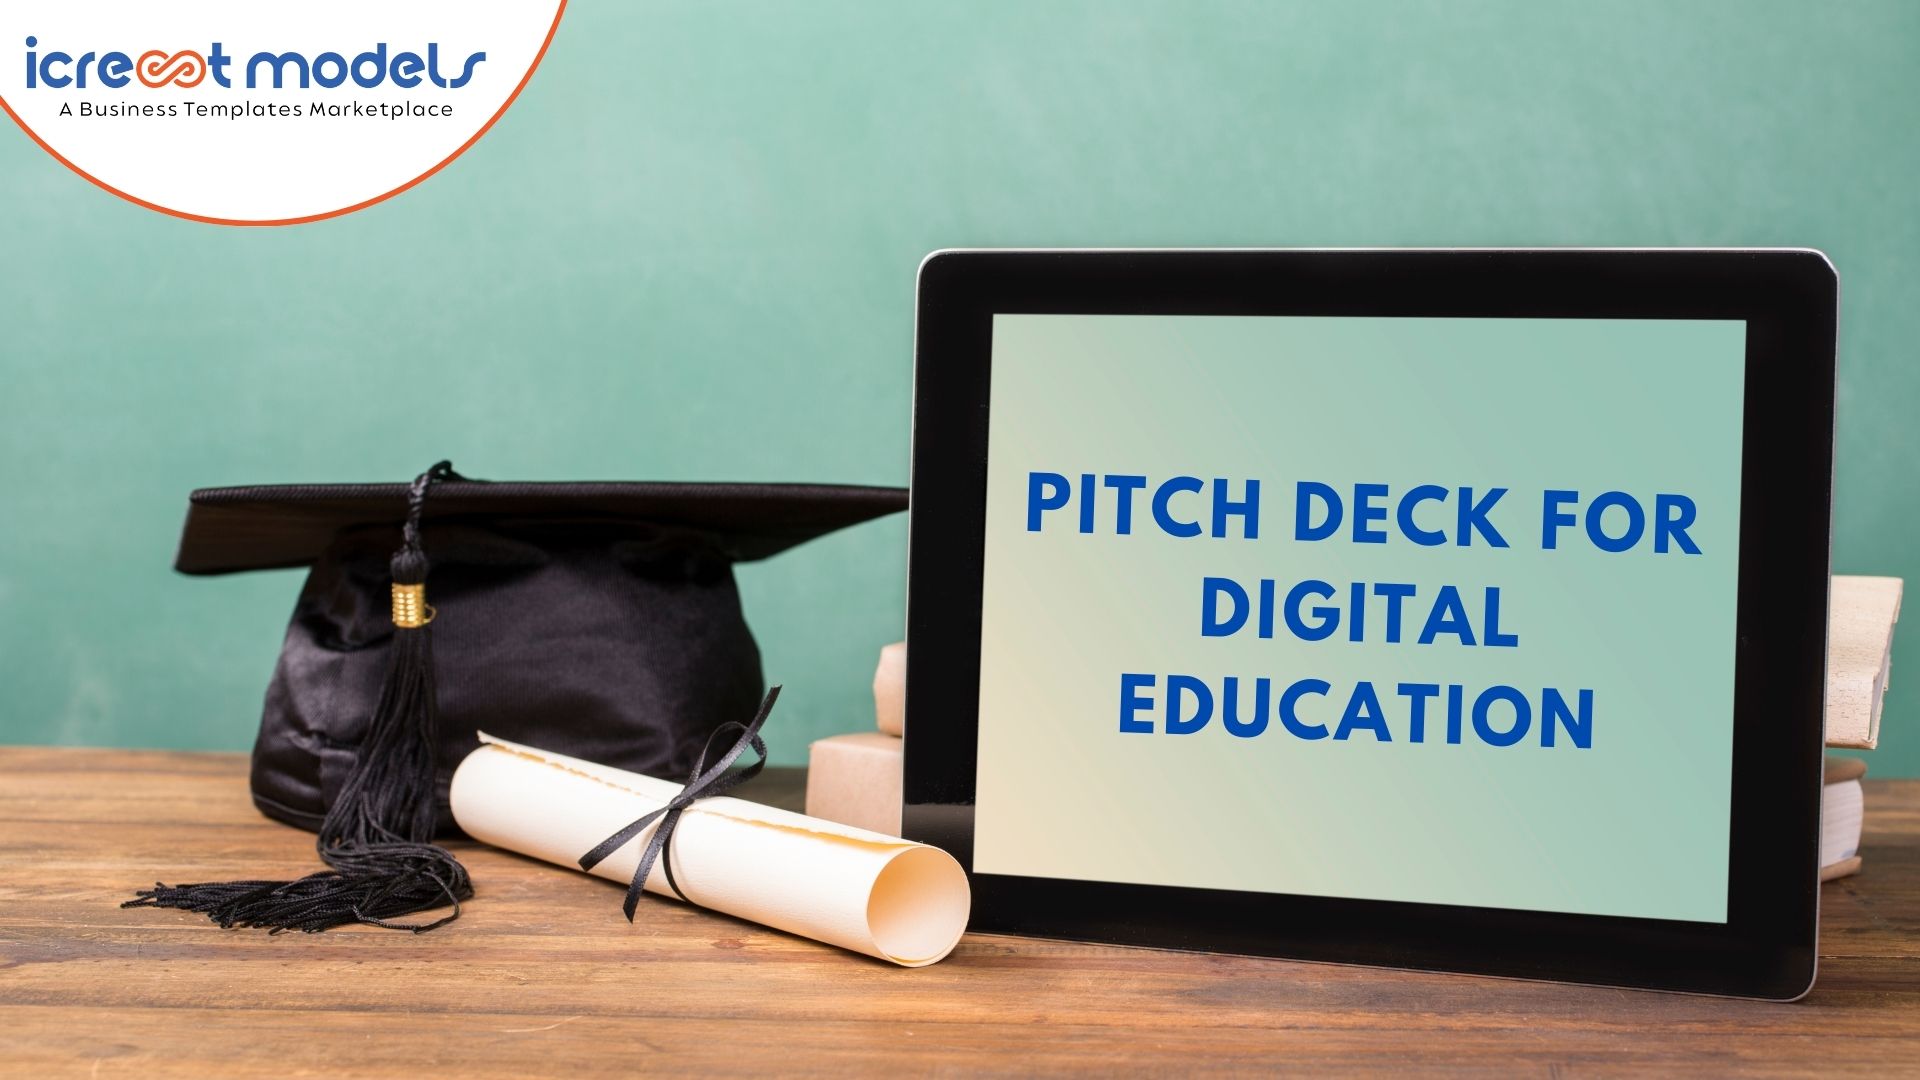 Pitch Deck for digital education